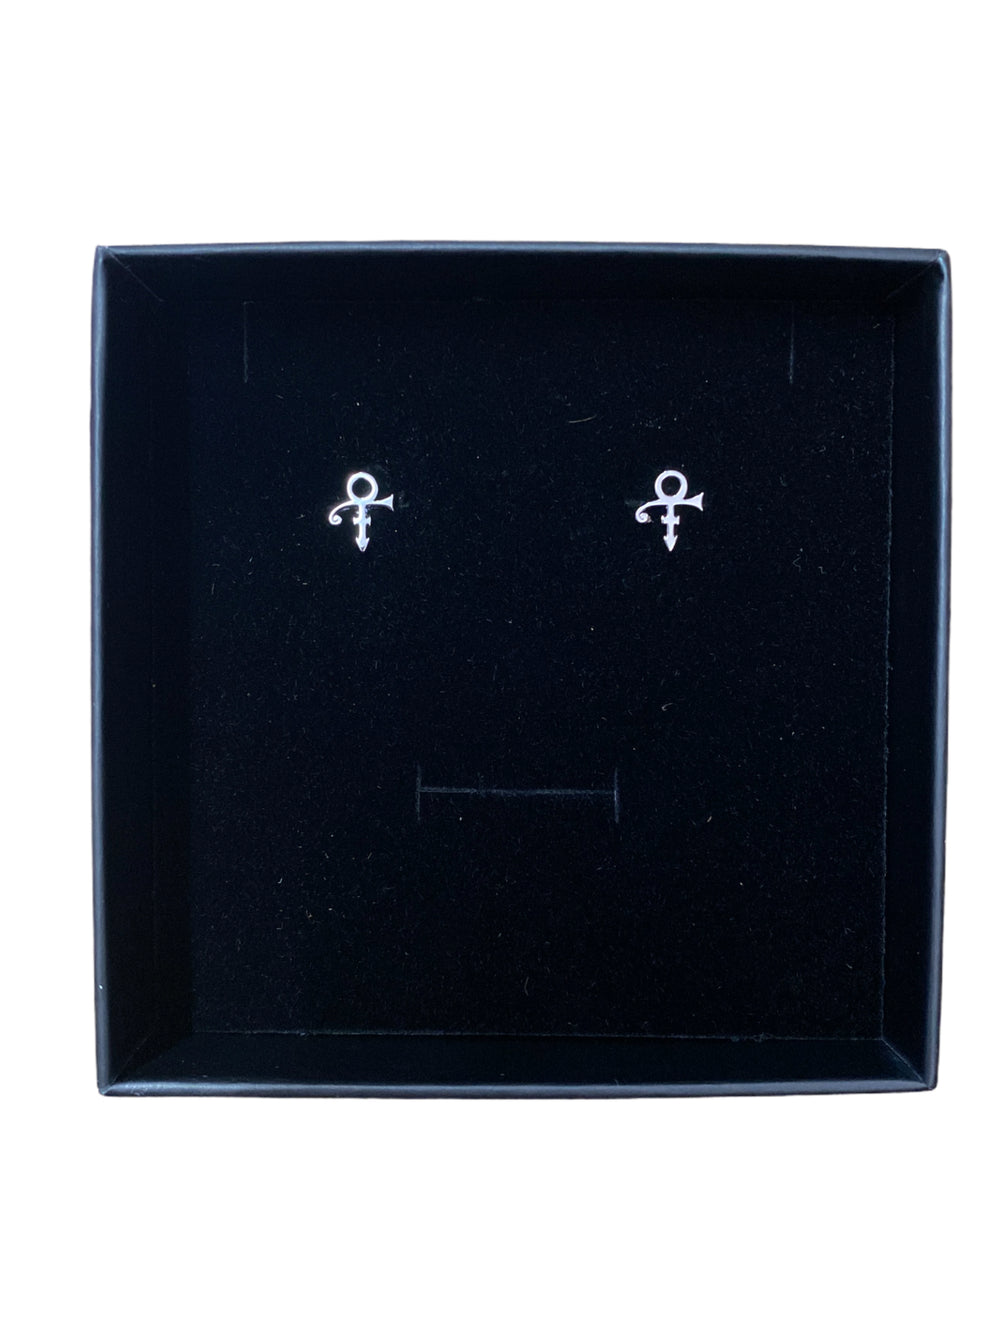 Prince – Official Estate Love Symbol 1 Pair Stud Earrings Silver Boxed